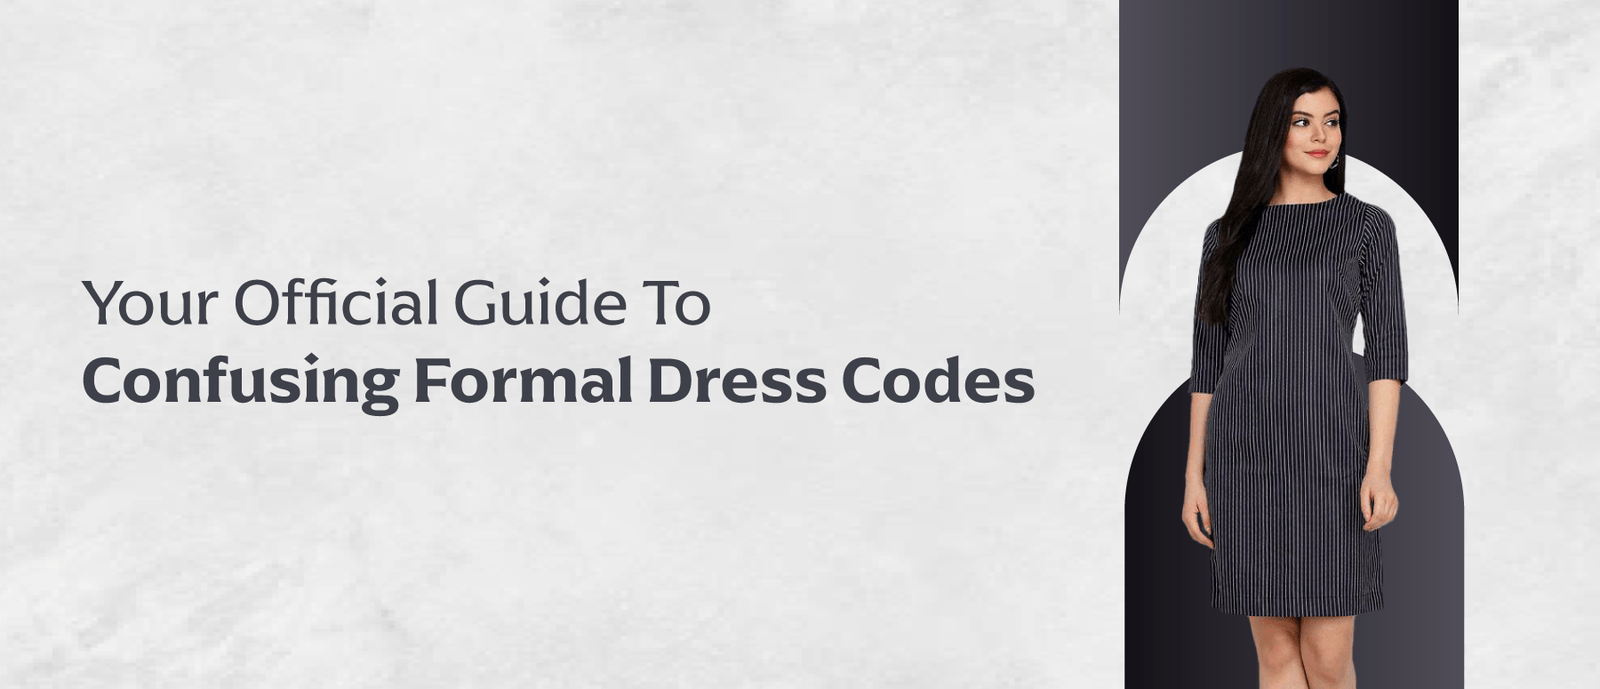 Your Official Guide To Formal Dress Codes | Women formal clothing